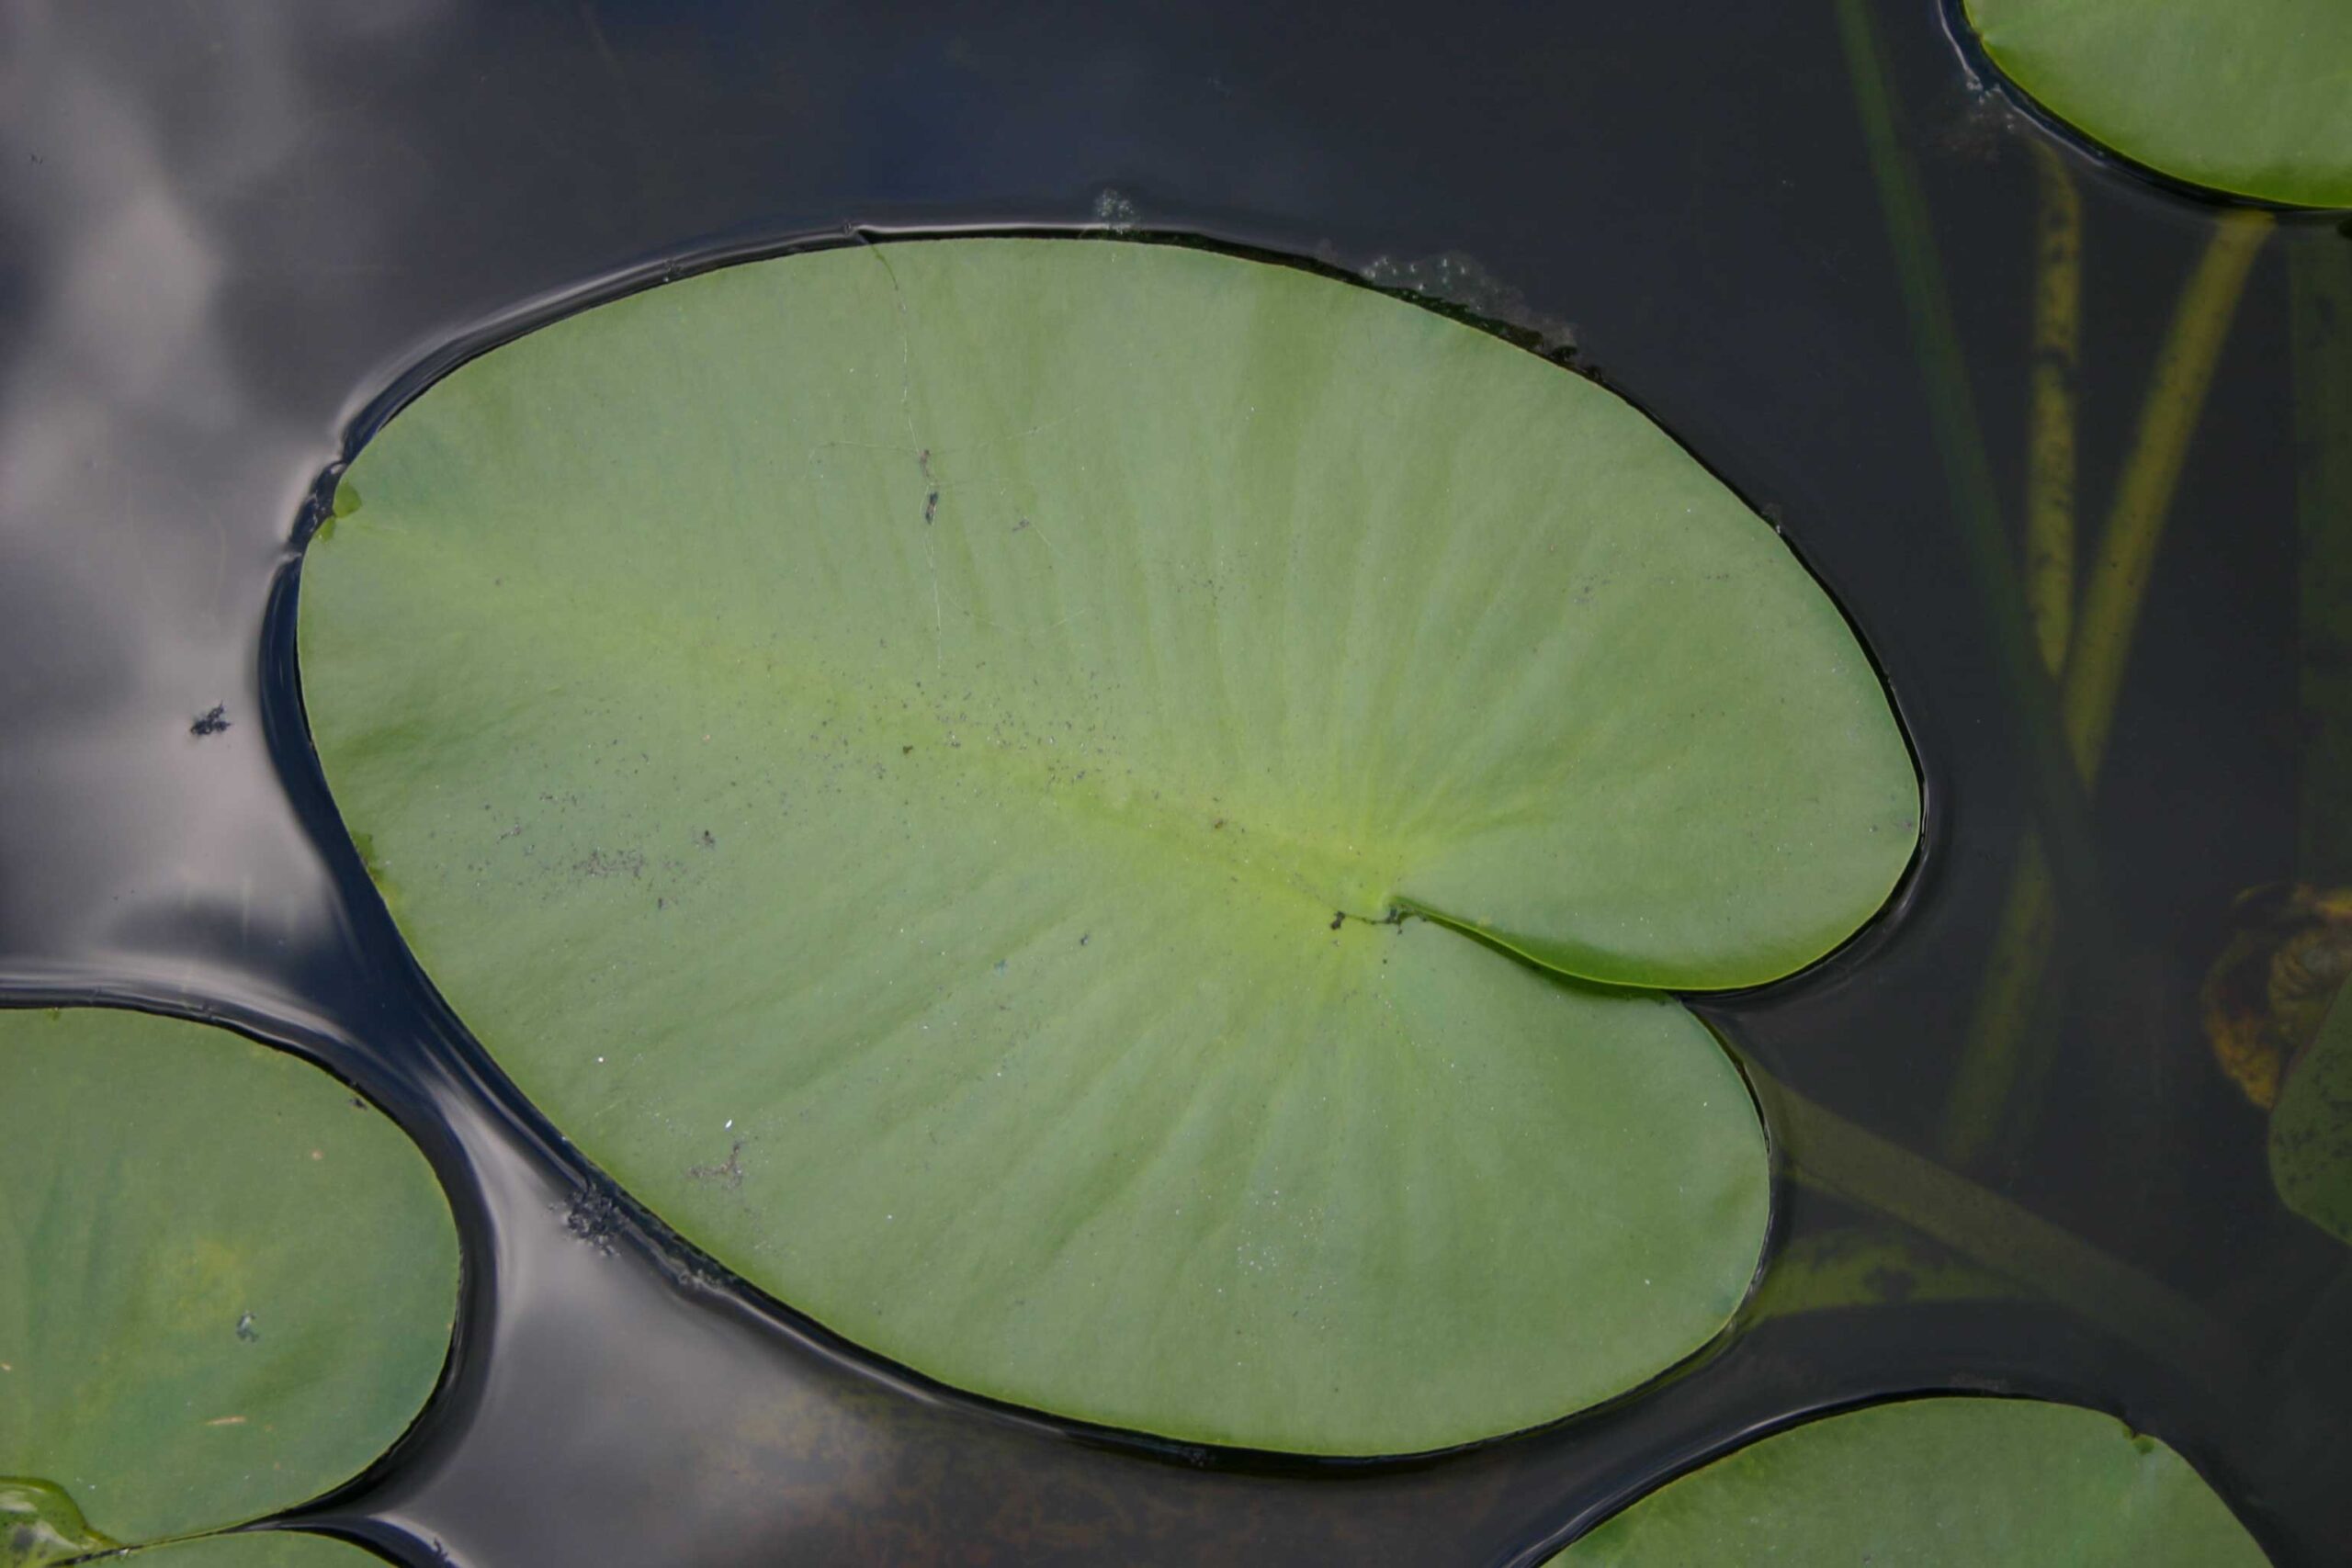 Close-up on a oval green pond-lily leaf on the water's surface.